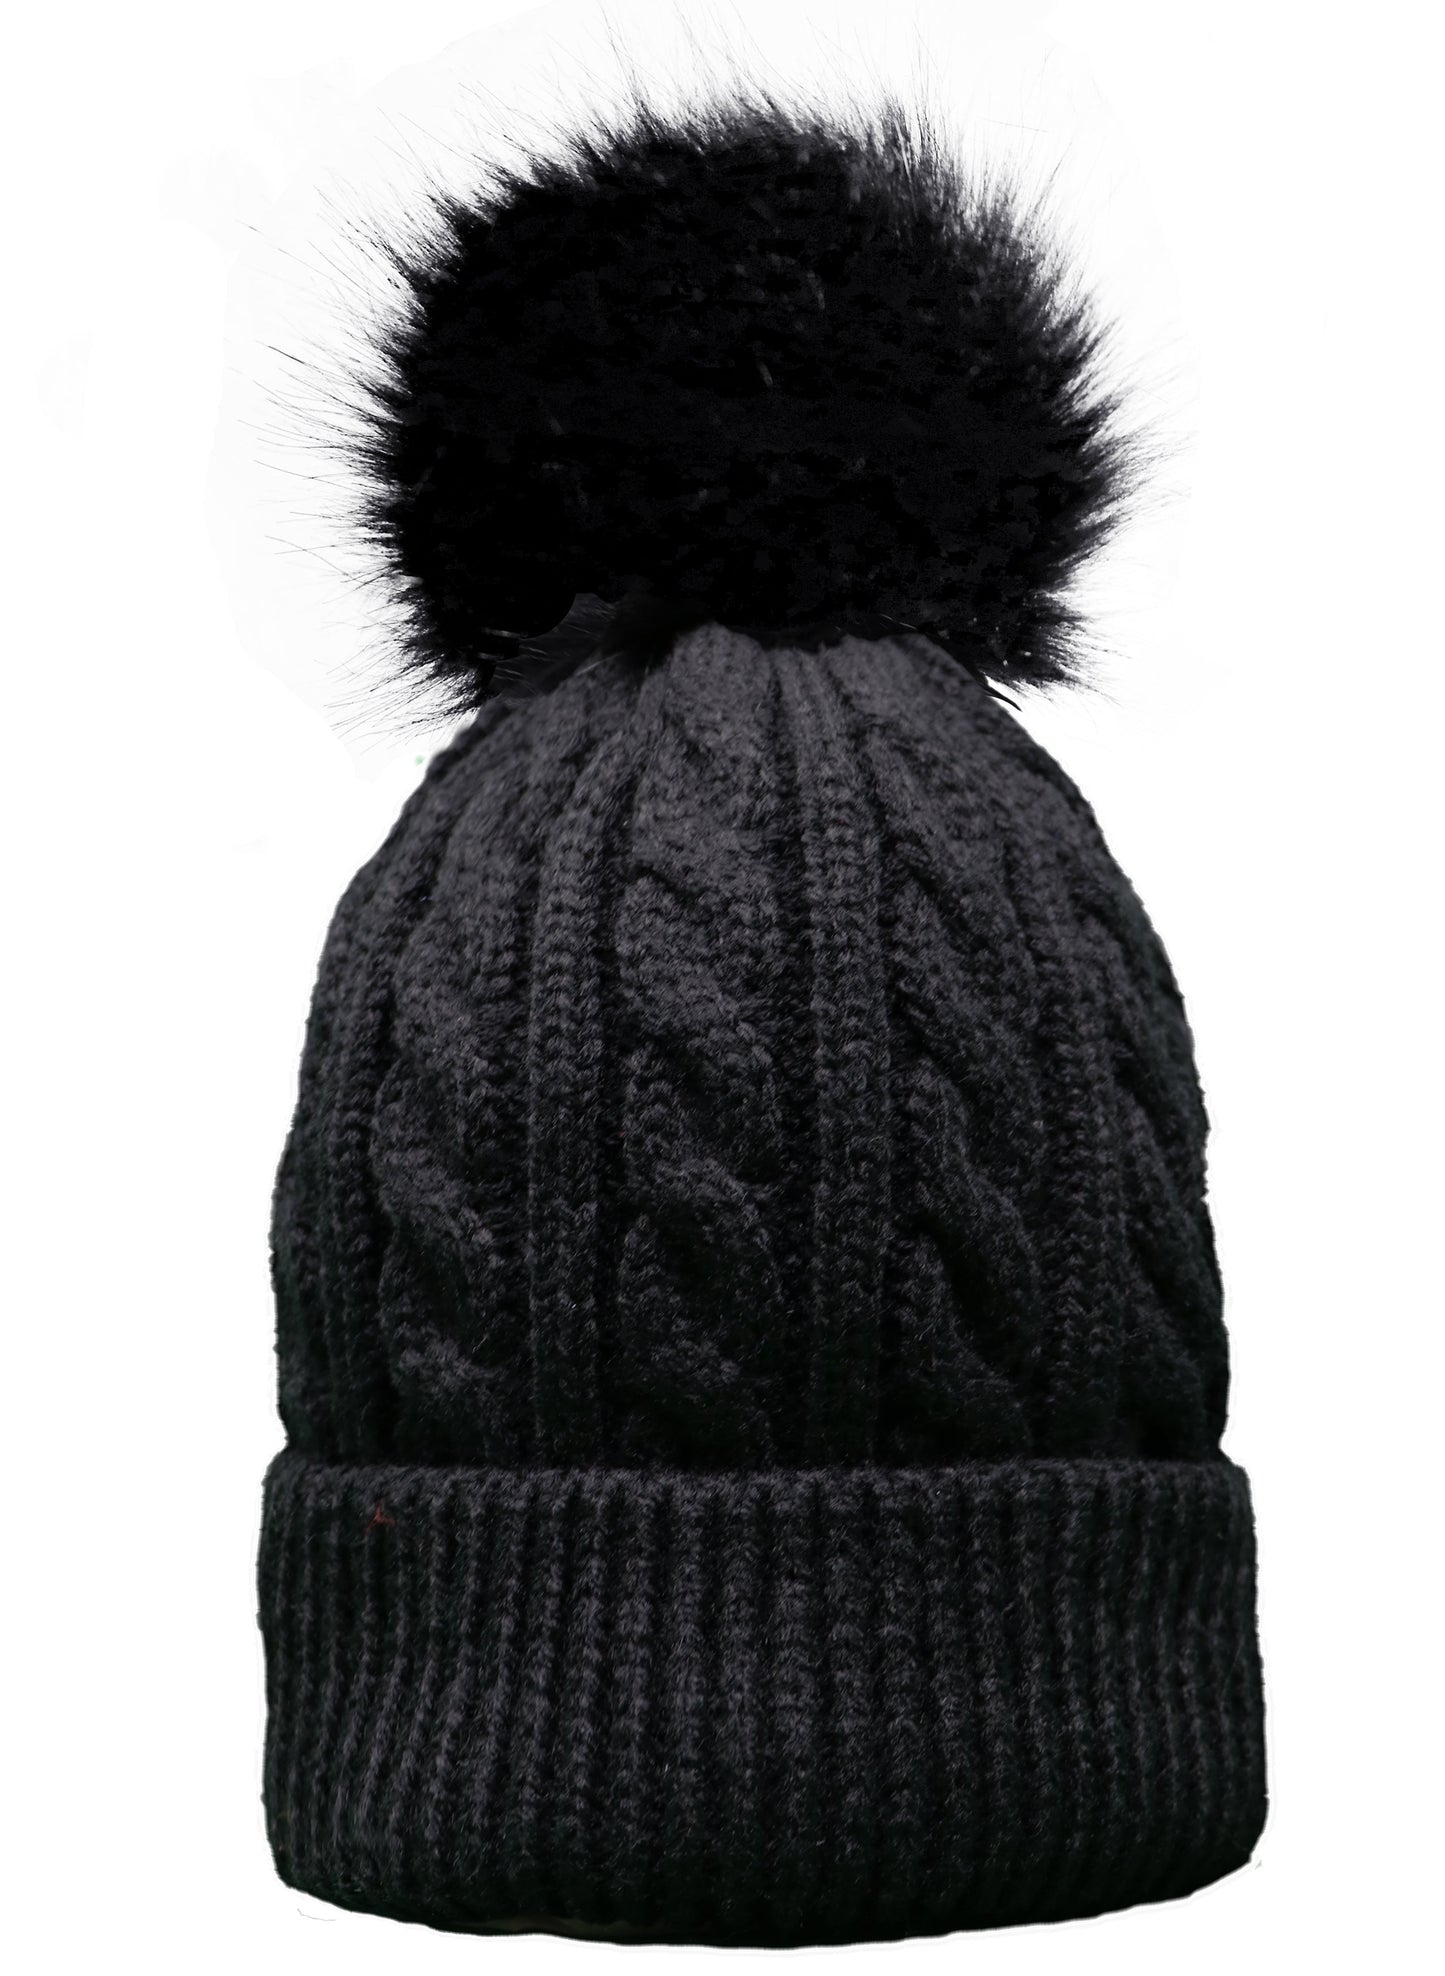 Kids Cable Knitted Pom Pom Hat